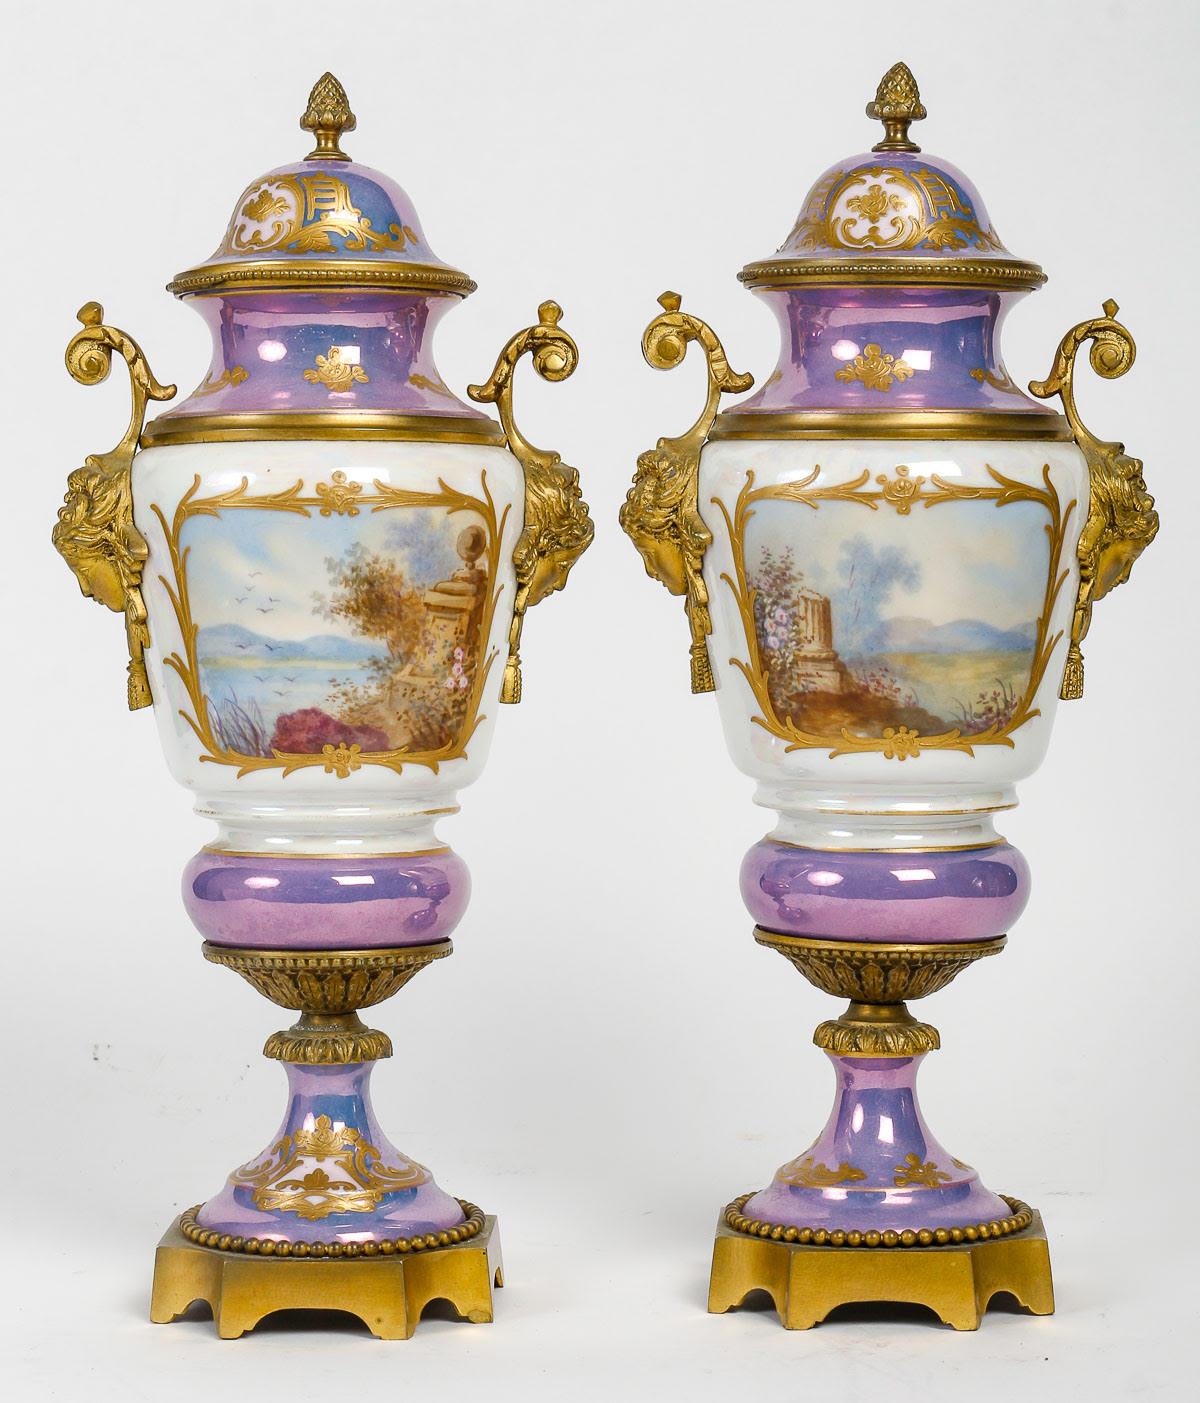 Pair of Iridescent Sèvres Porcelain and Gilt Bronze Covered Vases, 19th Century. 1